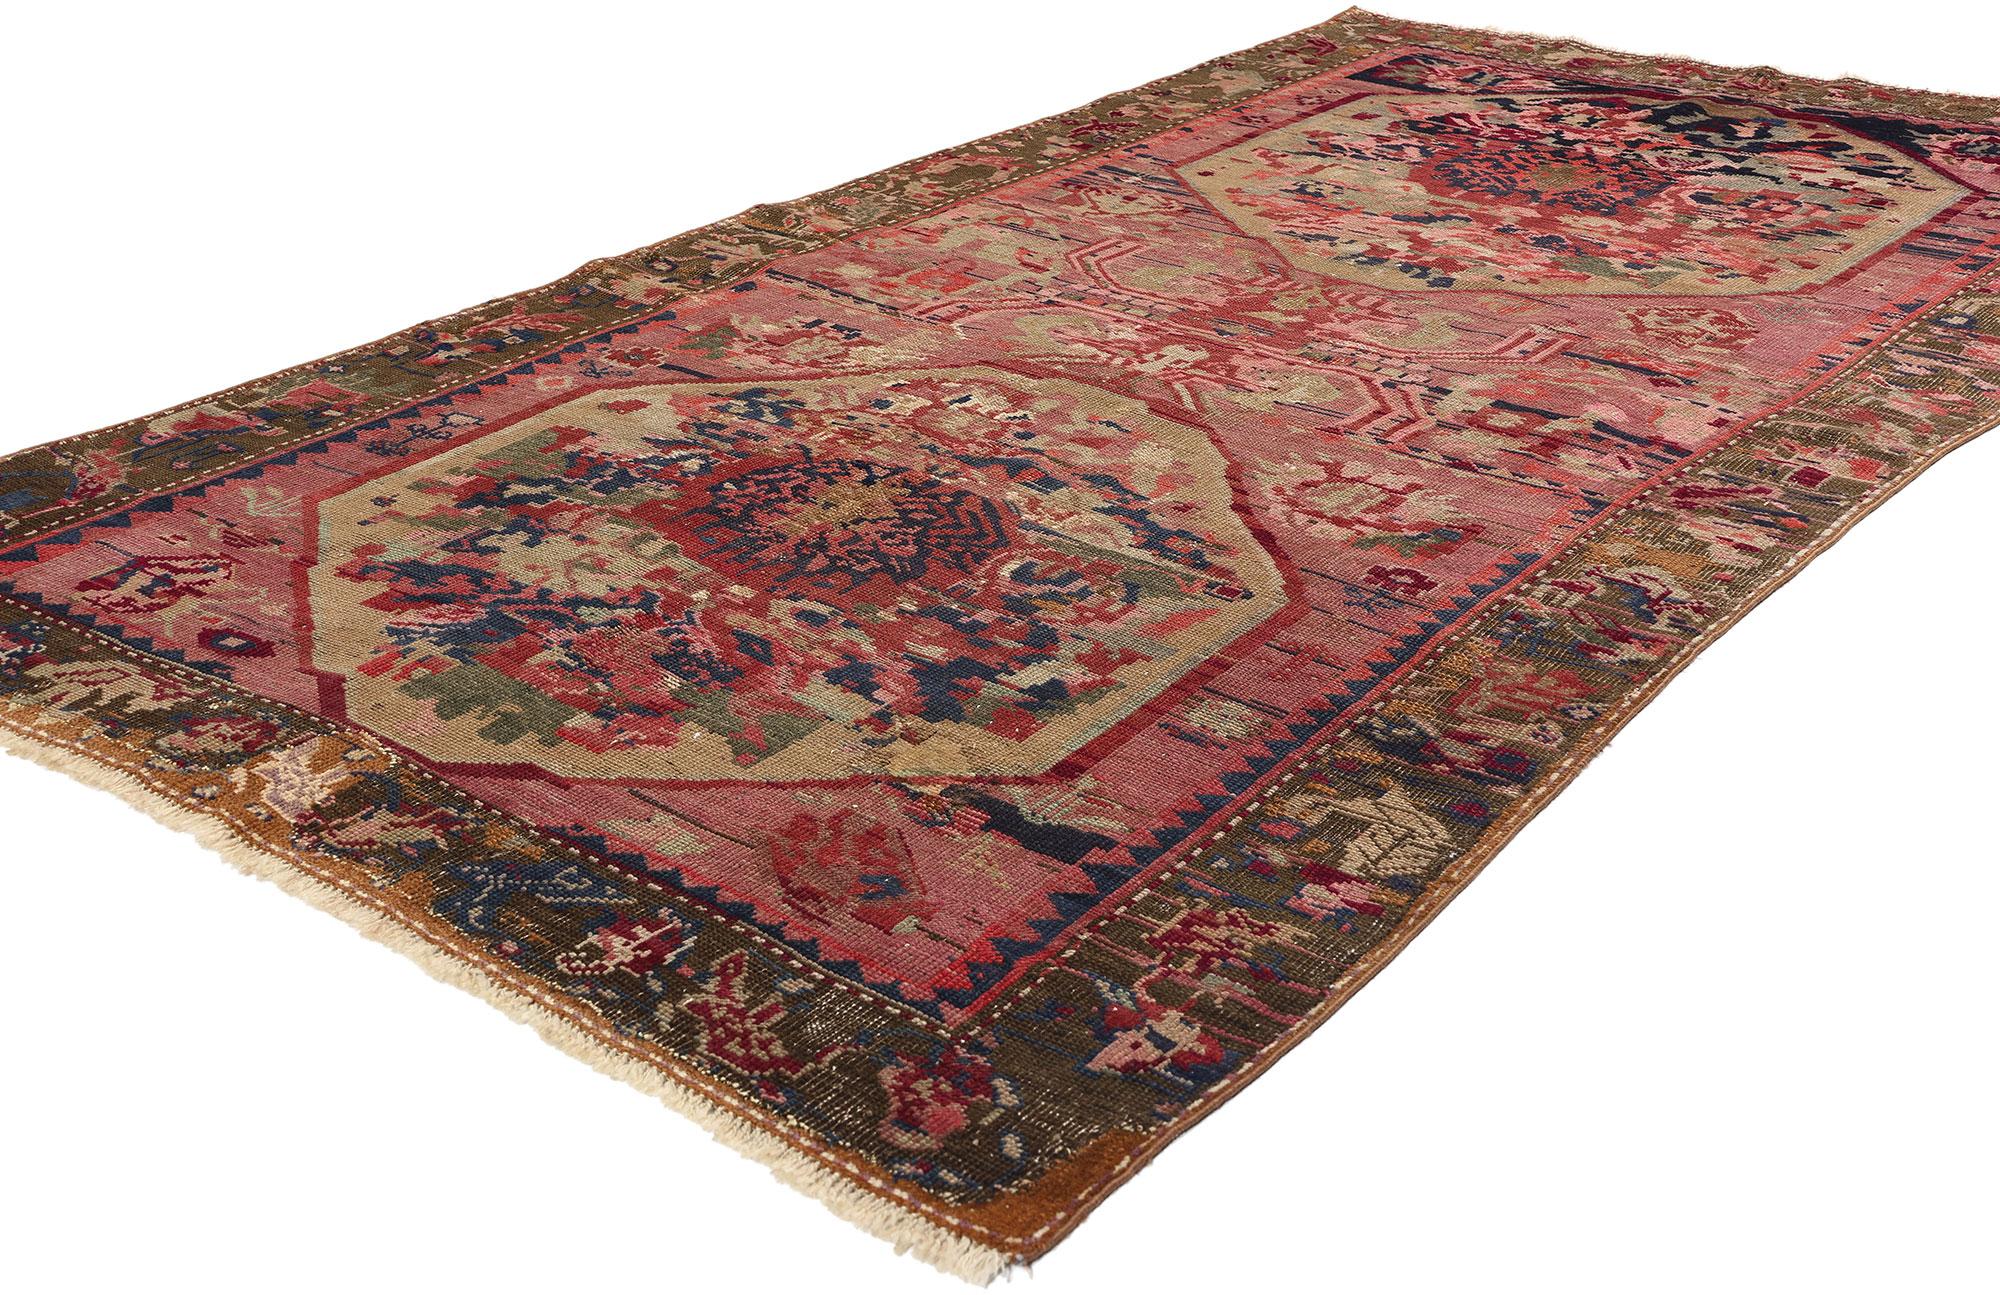 61160 Antique Caucasian Karabagh Rose Rug, 04'02 x 07'06. Caucasian Karabagh rose rugs, originating from the Karabakh region in the South Caucasus, boast intricate rose motifs as their defining feature, set against vibrant colors and geometric